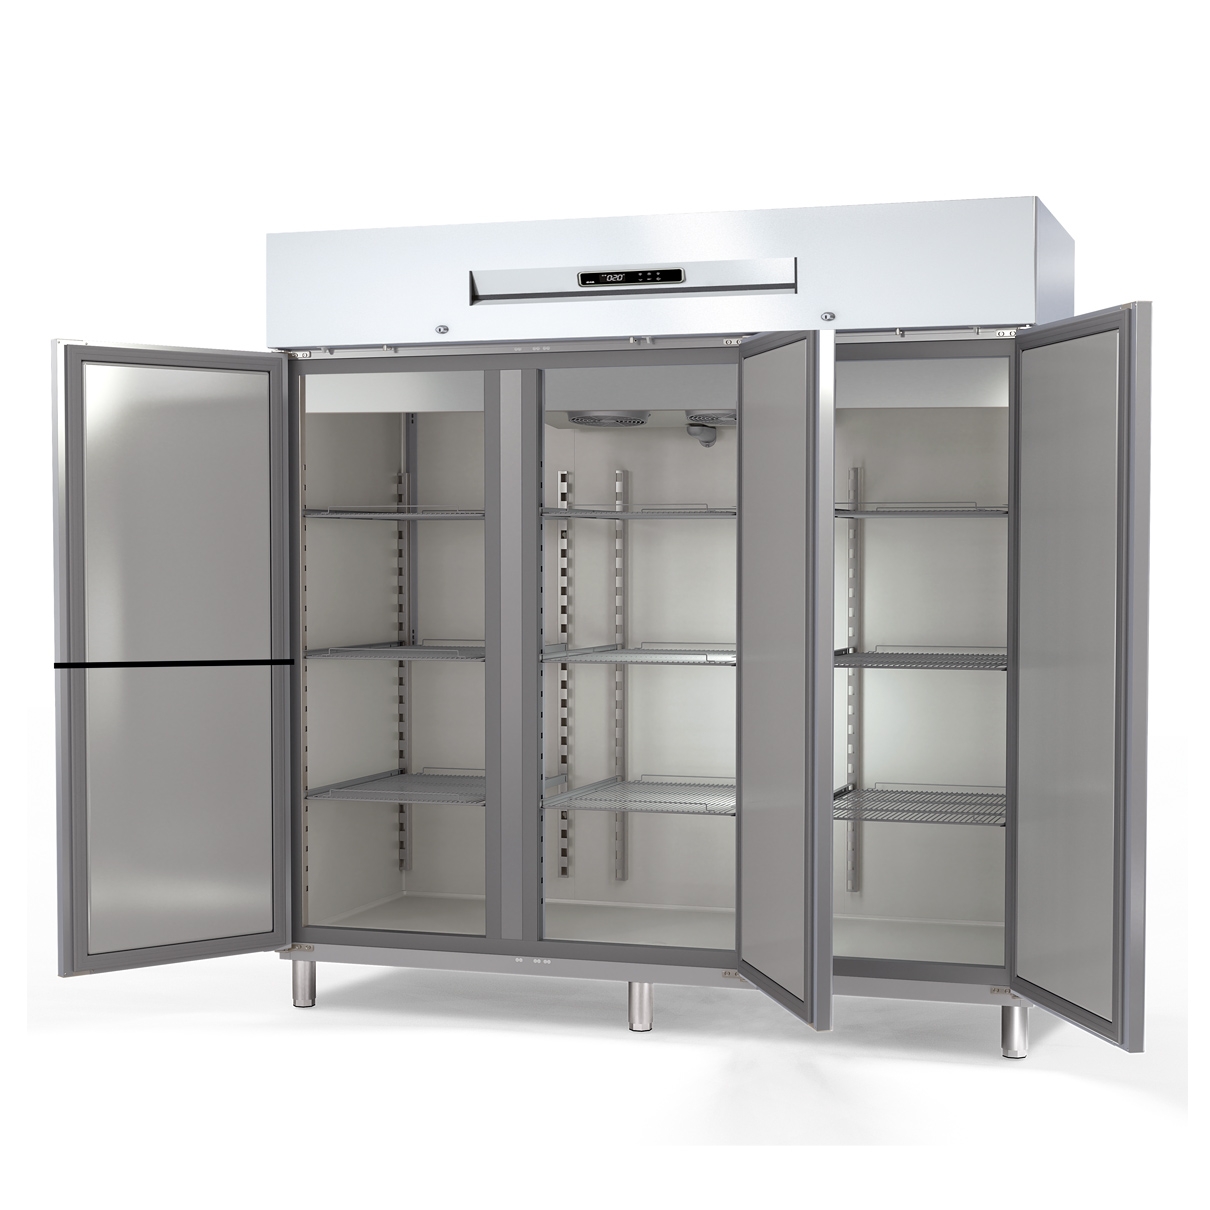 Gastronorm 2/1 Refrigerated Cabinet ARG-210-4